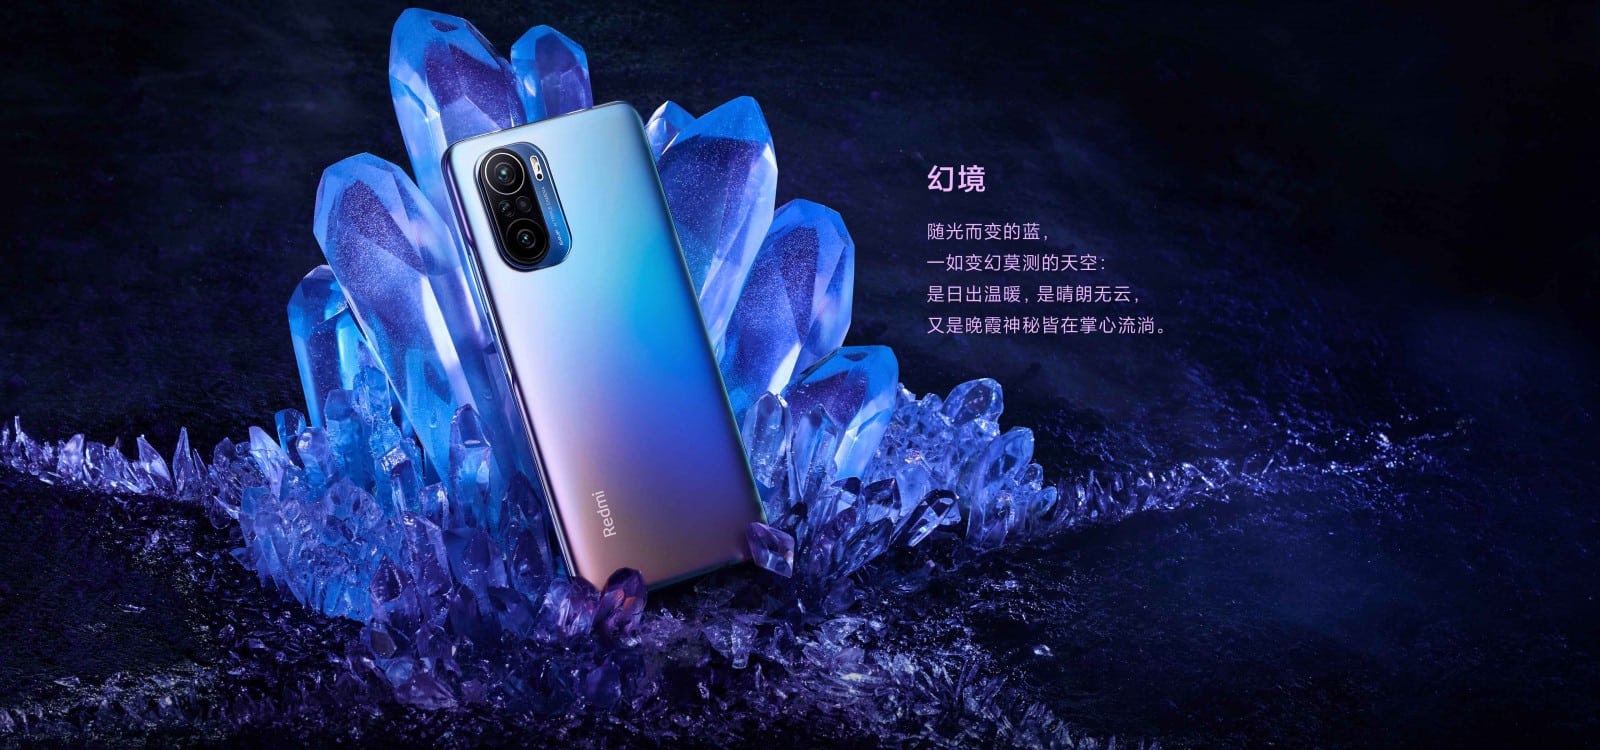 Xiaomi unveils Redmi K40 Pro+ with 108MP camera along with K40 Pro and K40